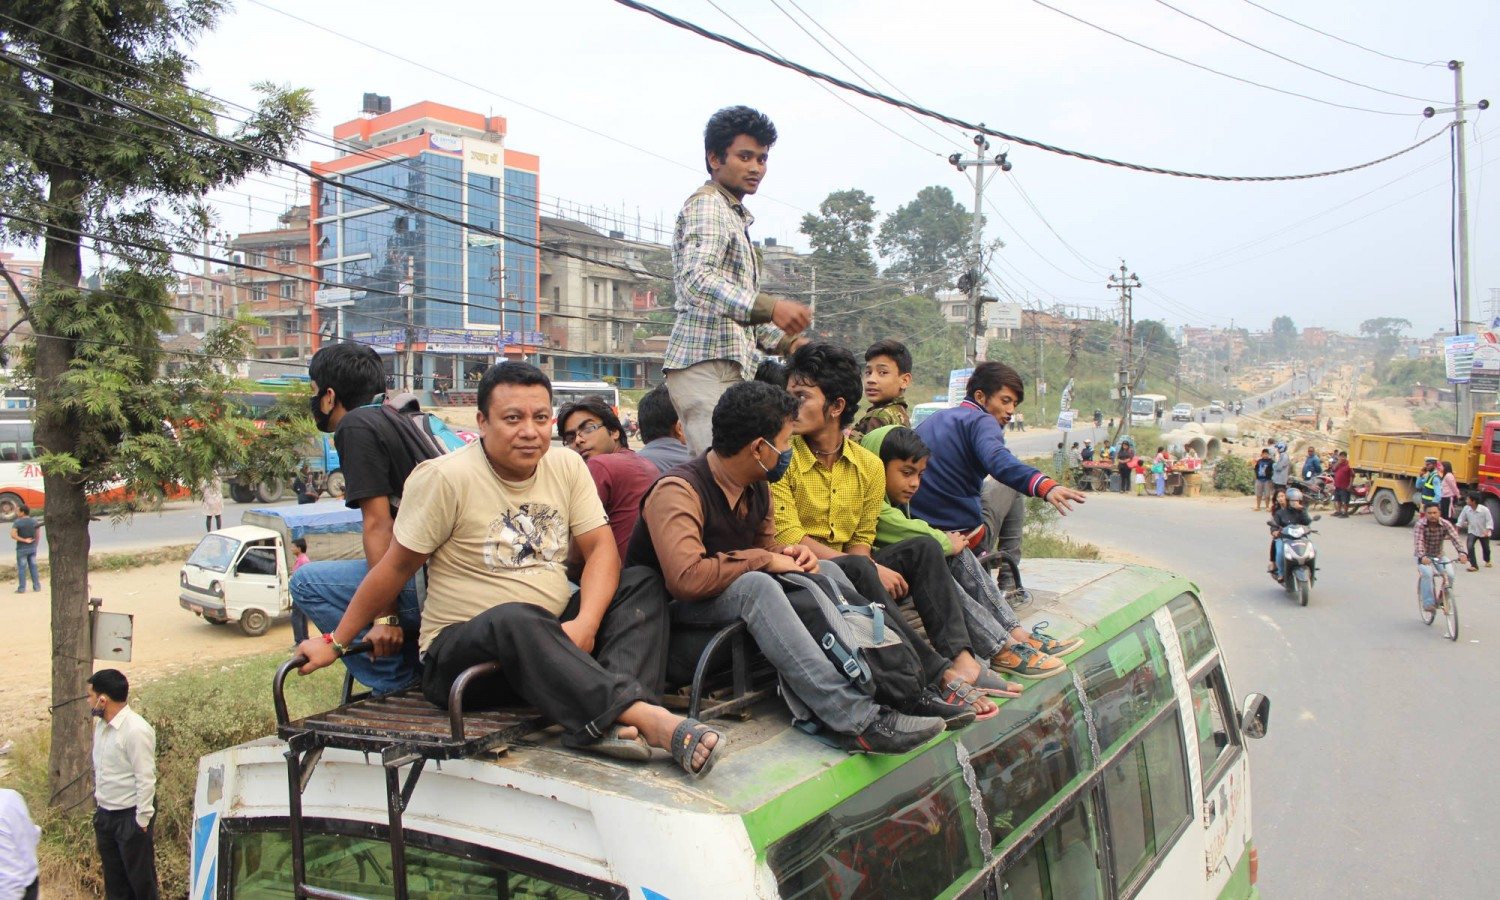 Commuters sit on the roof of a bus in Kathmandu during during the fuel crisis.